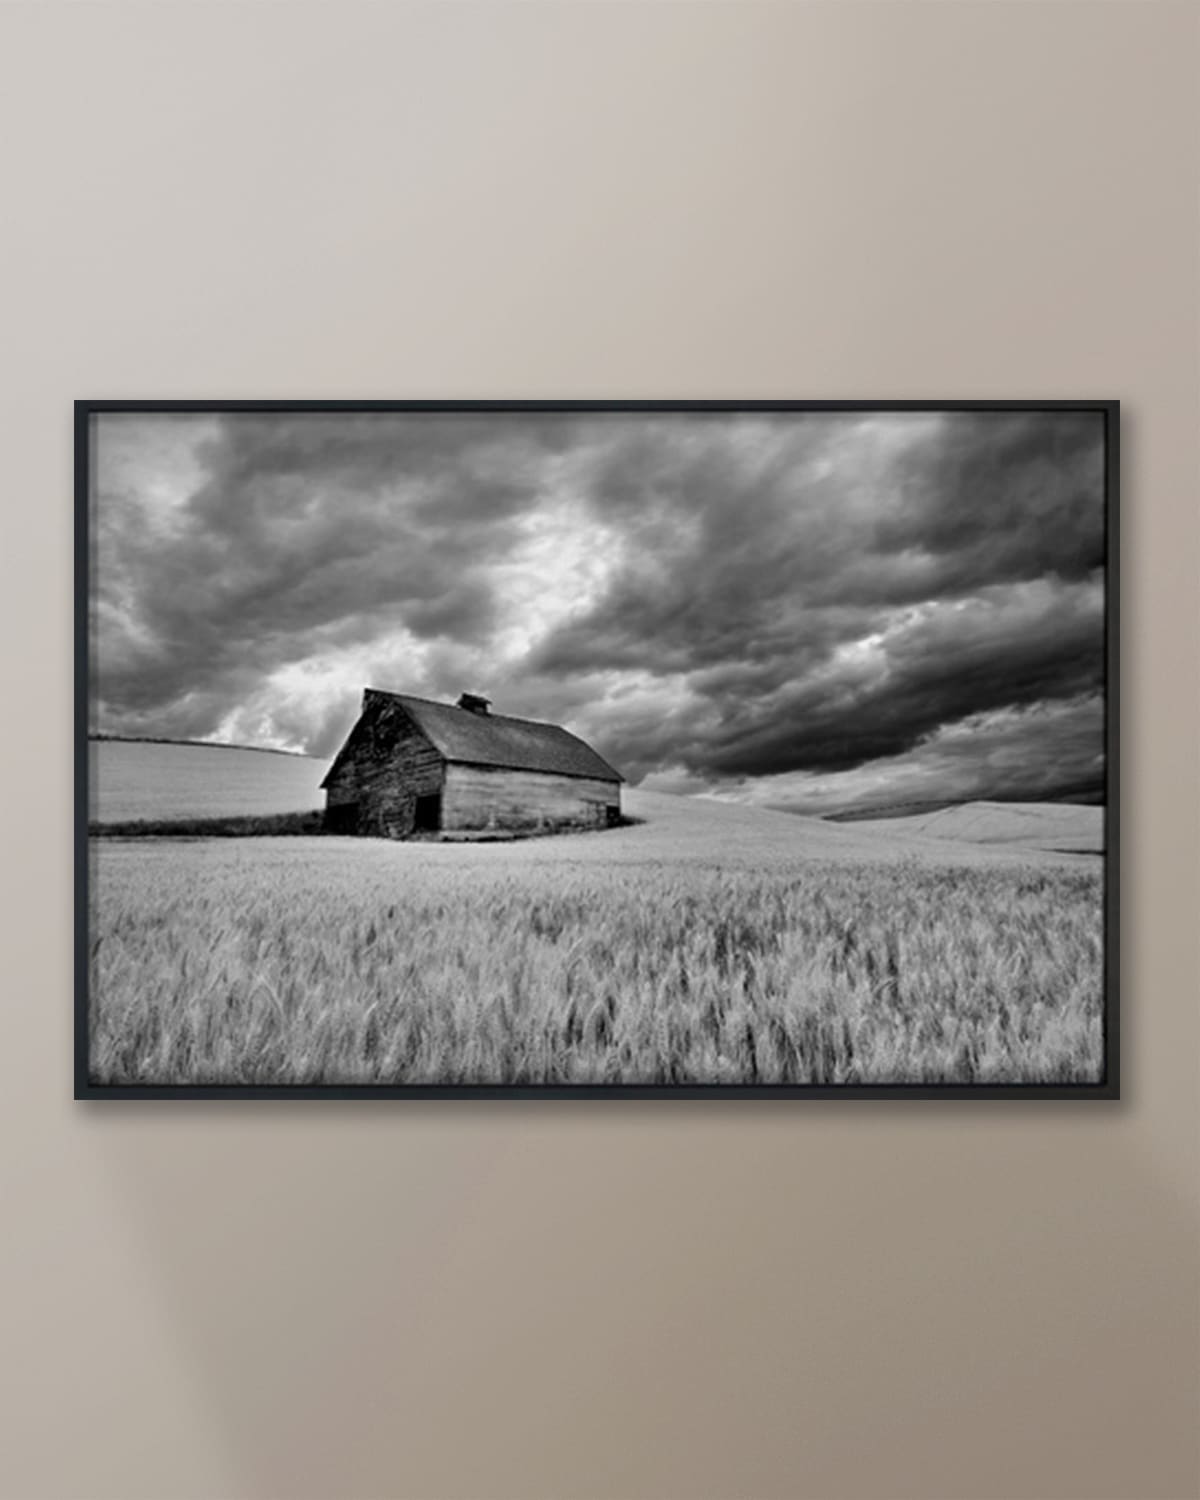 Barn in the Wheat Field with Approaching Storm Photo